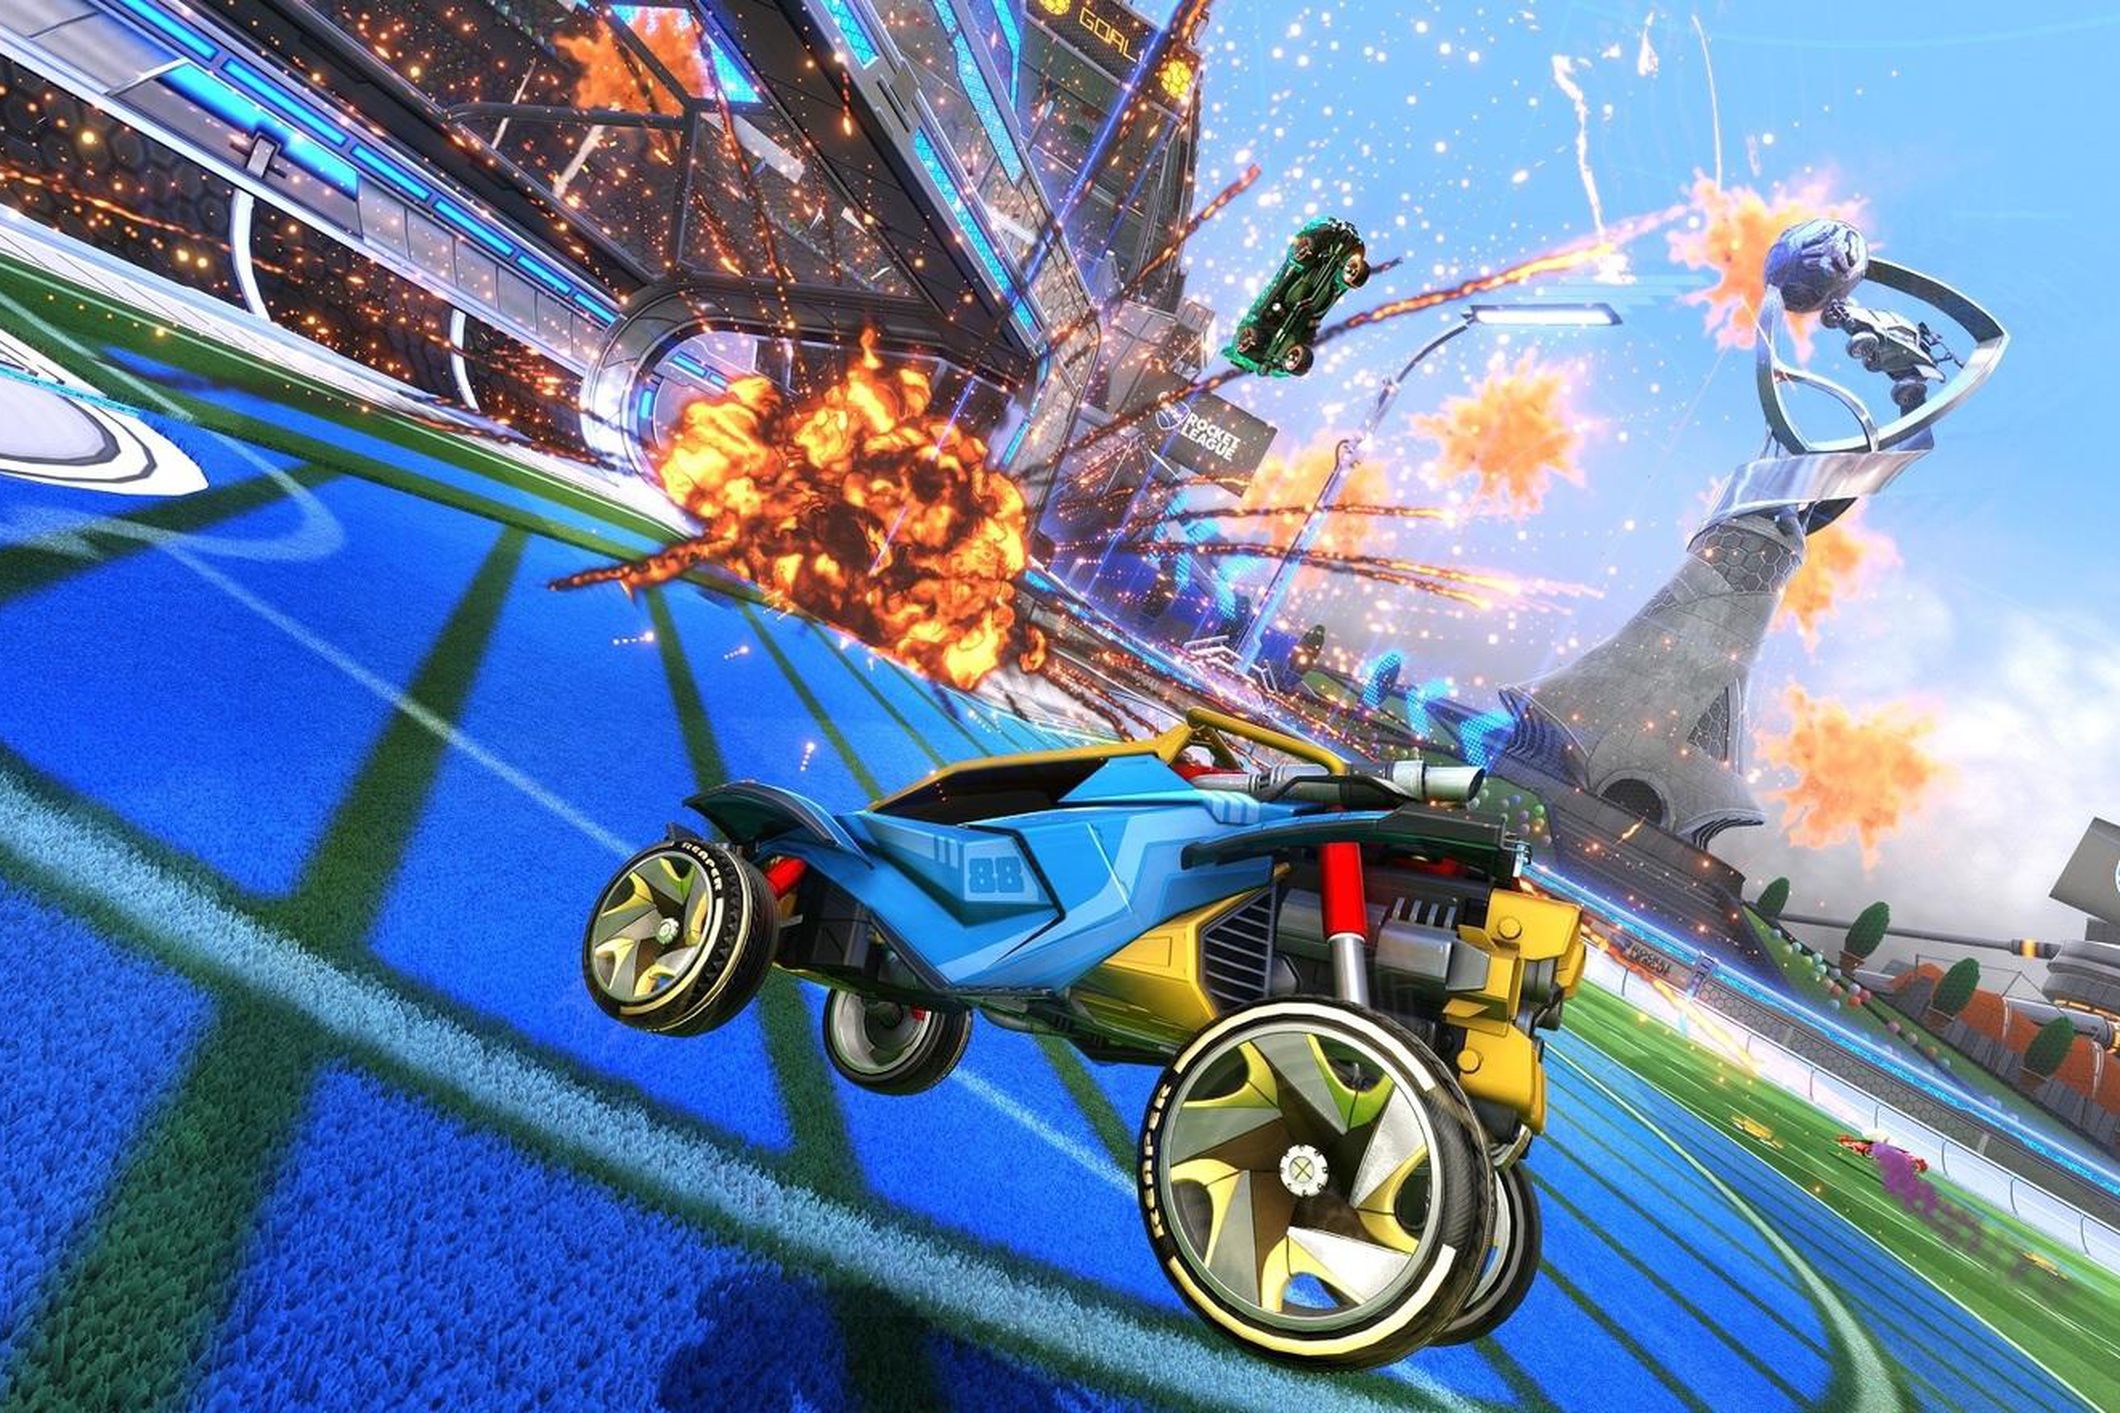 Rocket League’s new Rocket Pass: more details, what you get, cost - Polygon